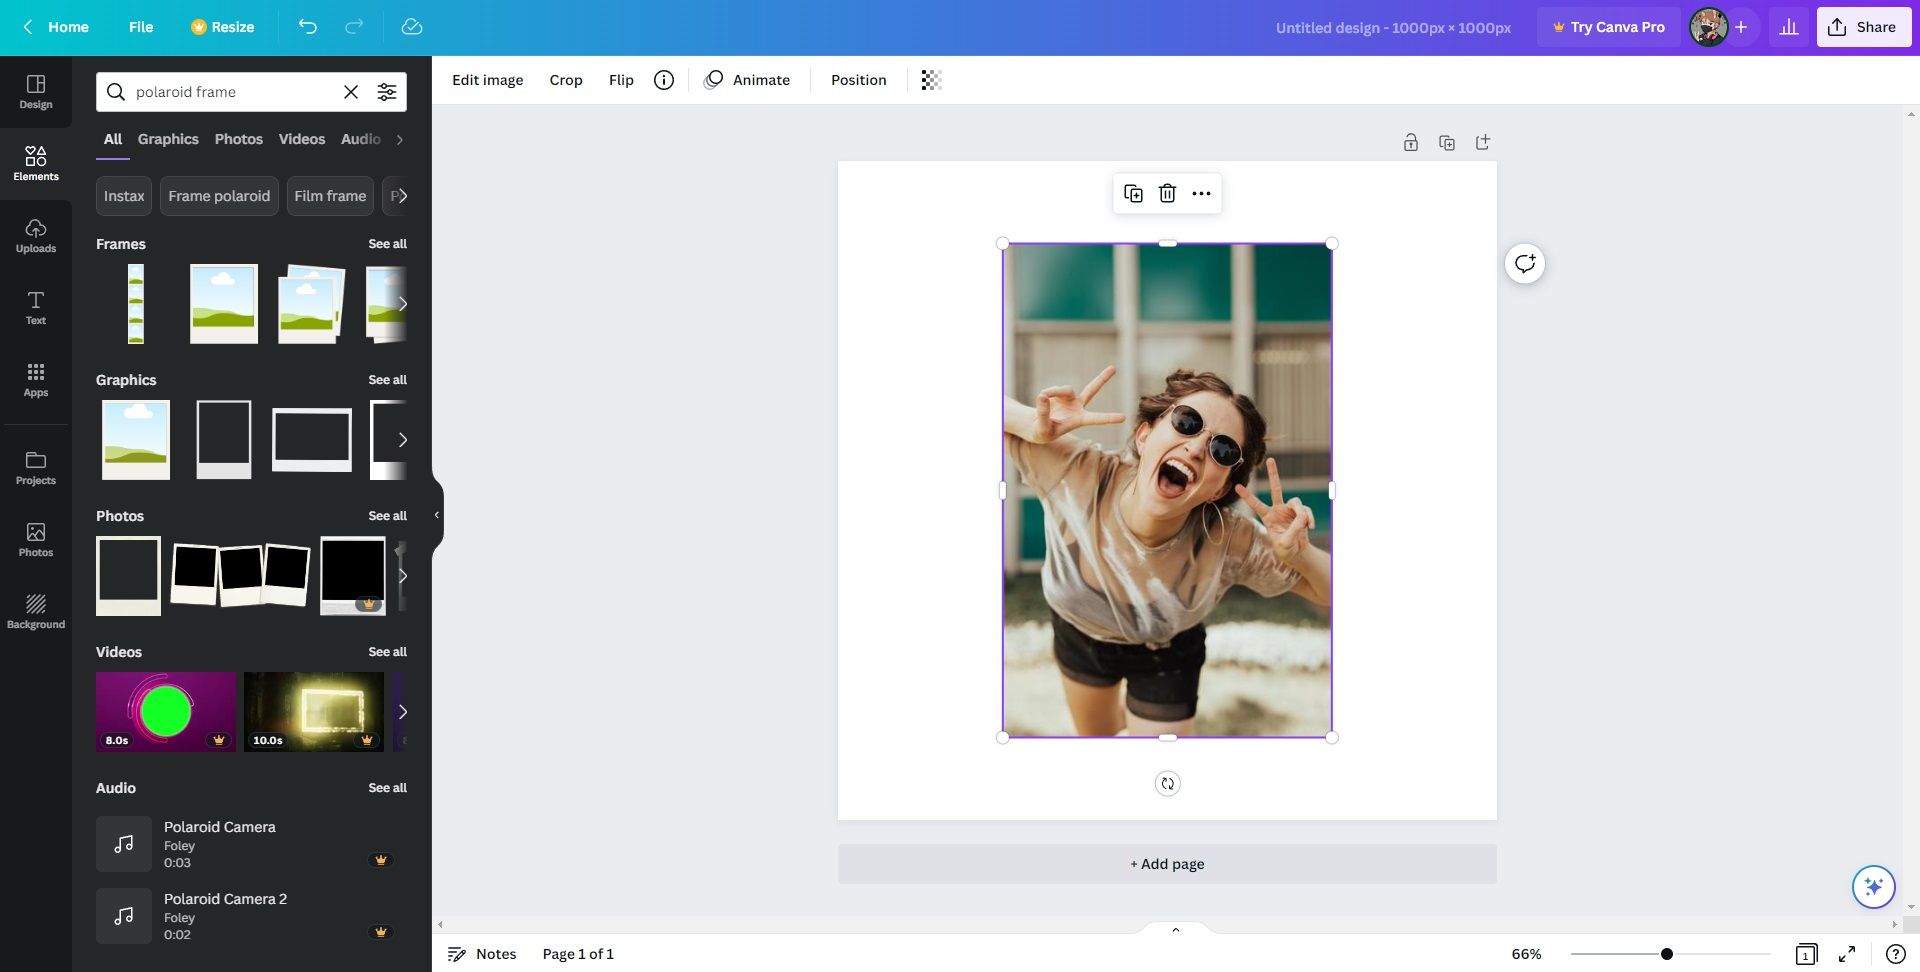 Upload photo to Canva and search for elements